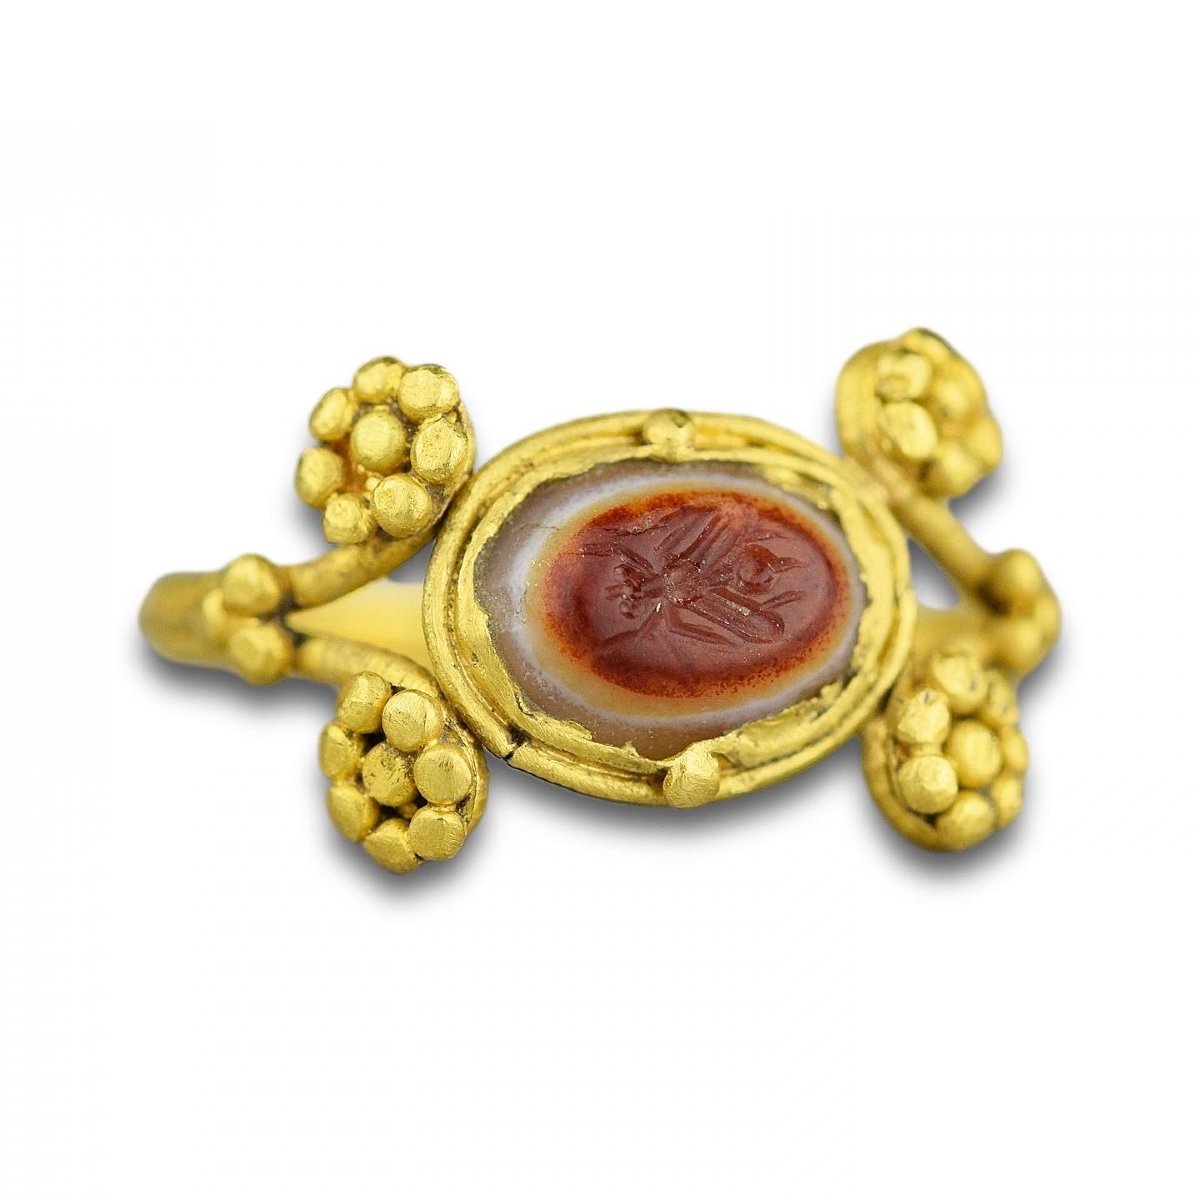 Ancient Gold Ring With An Agate Intaglio Of A Fly. Roman, 2nd - 3rd Century Ad.-photo-3